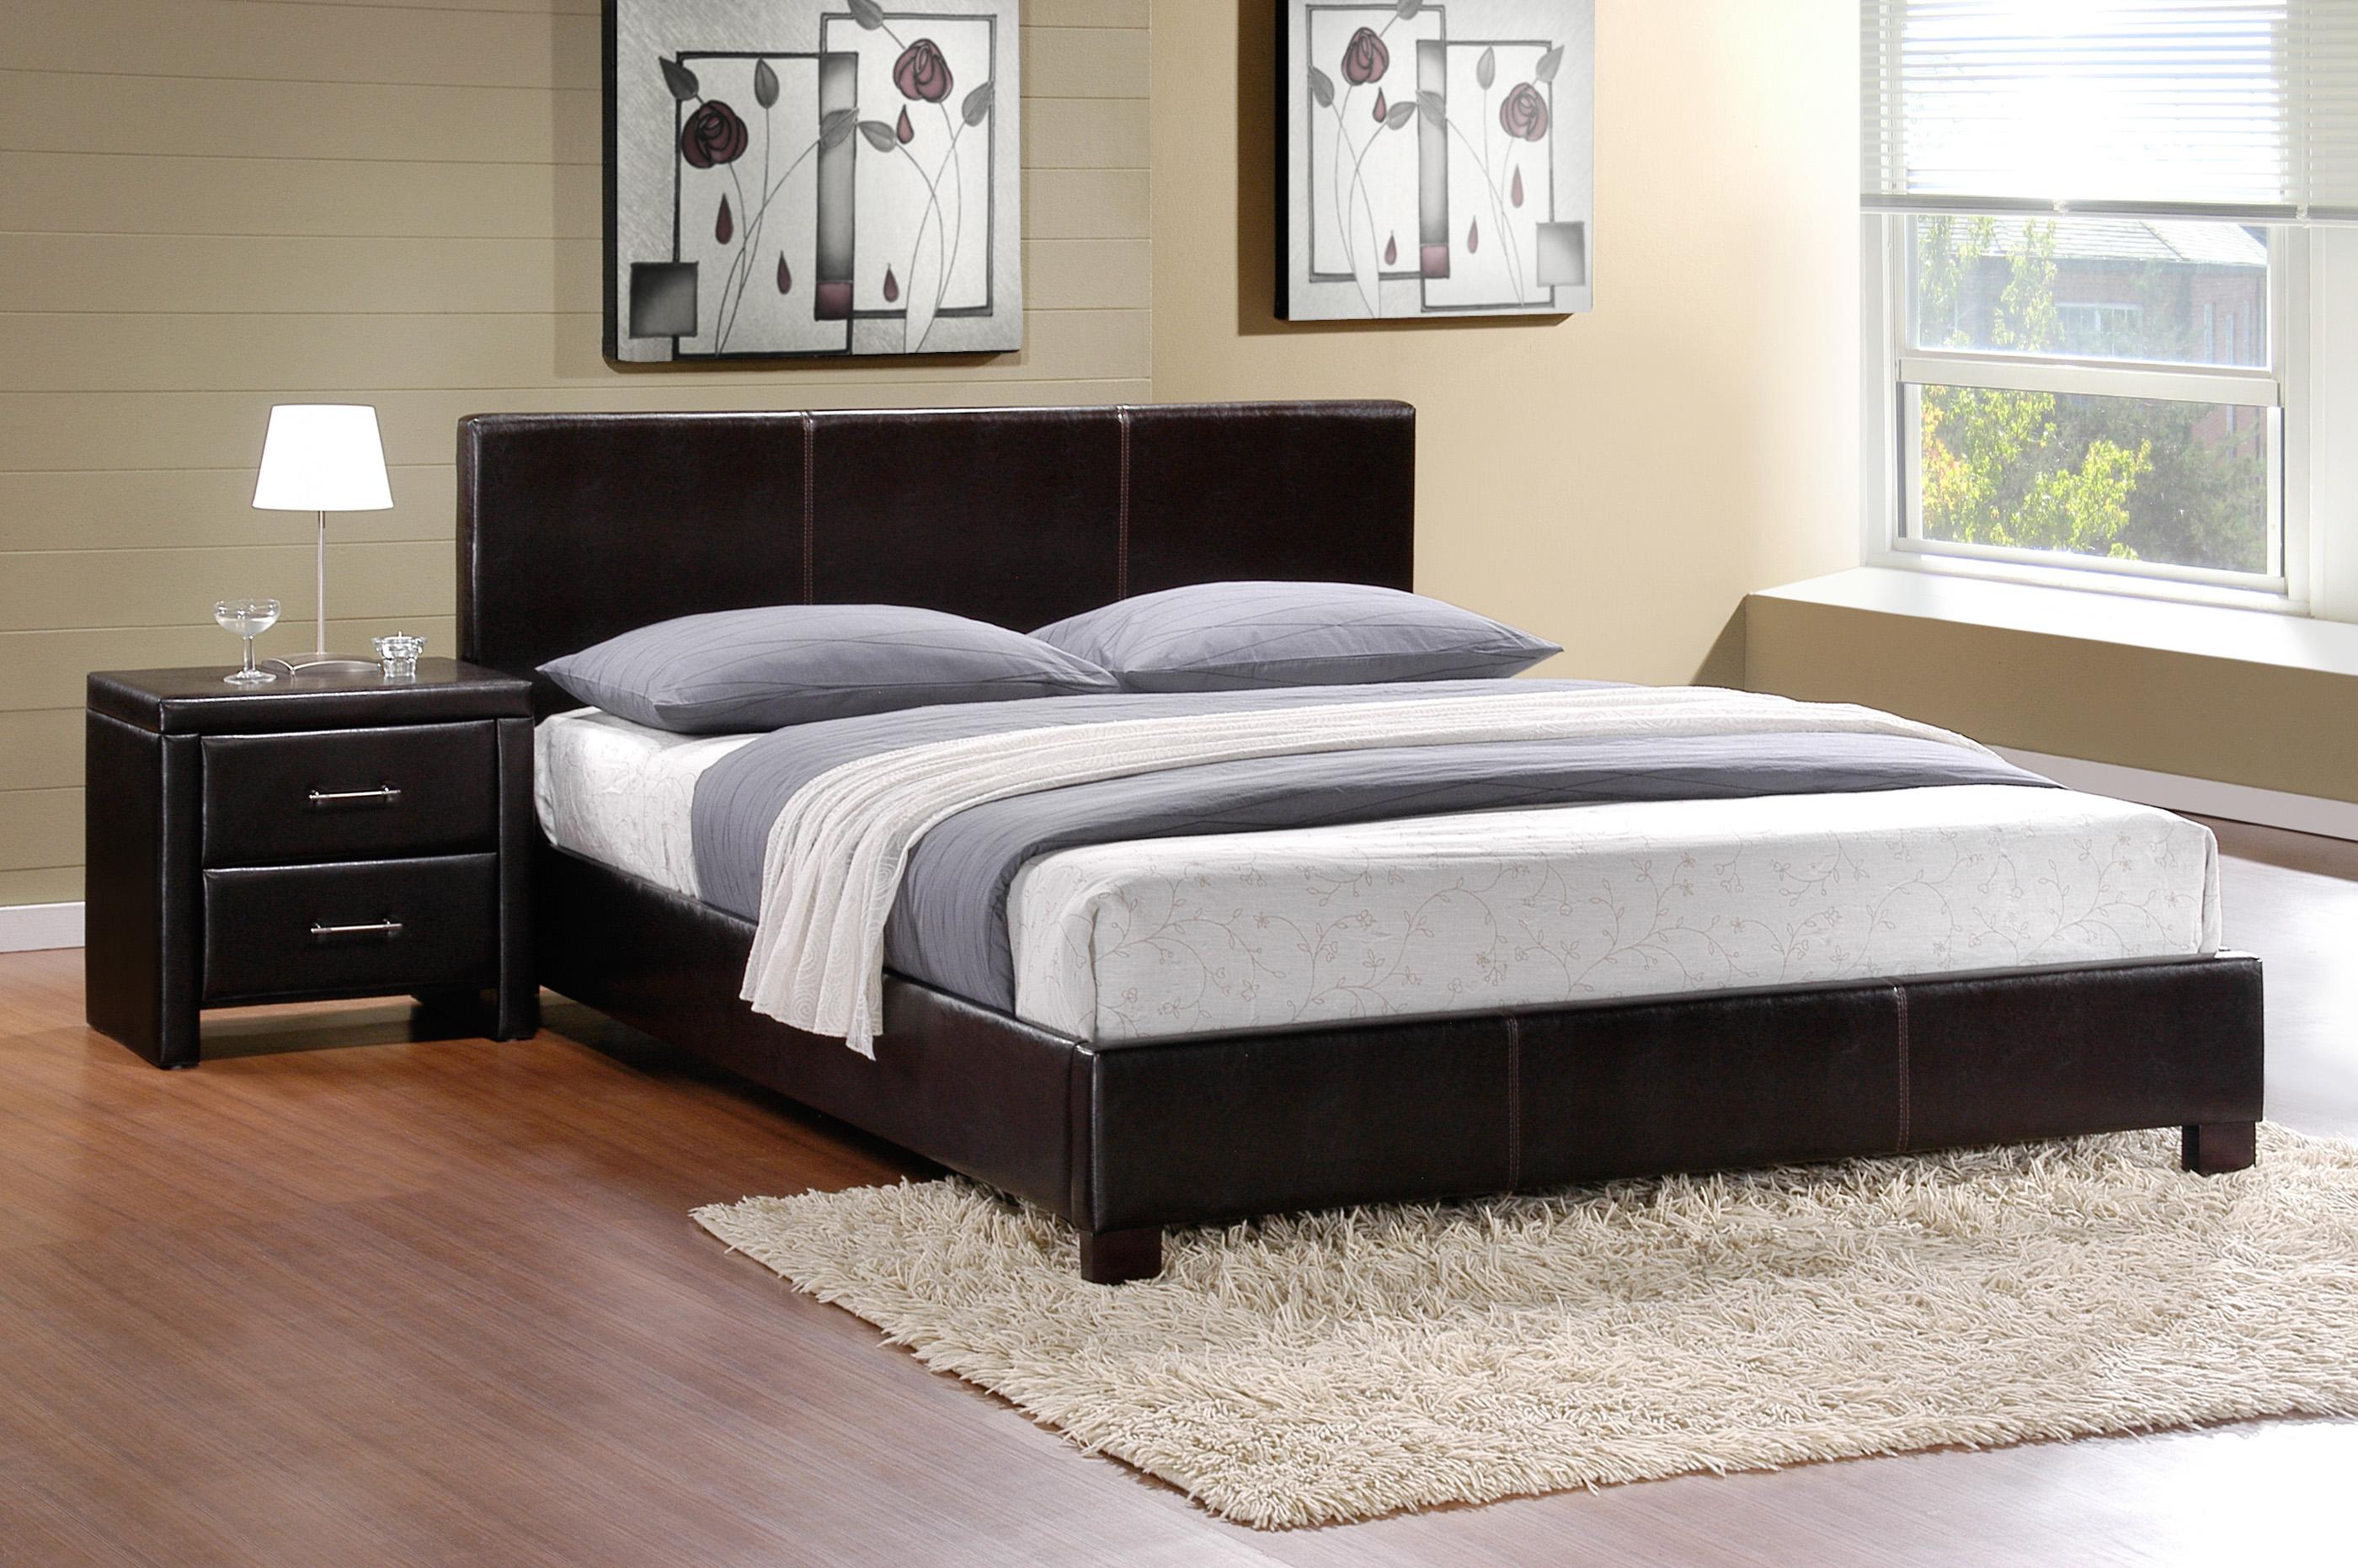 Transitional Bedroom Set 5790K-1CK-3PC Zoey 5790K-1CK-3PC in Dark Brown Faux Leather